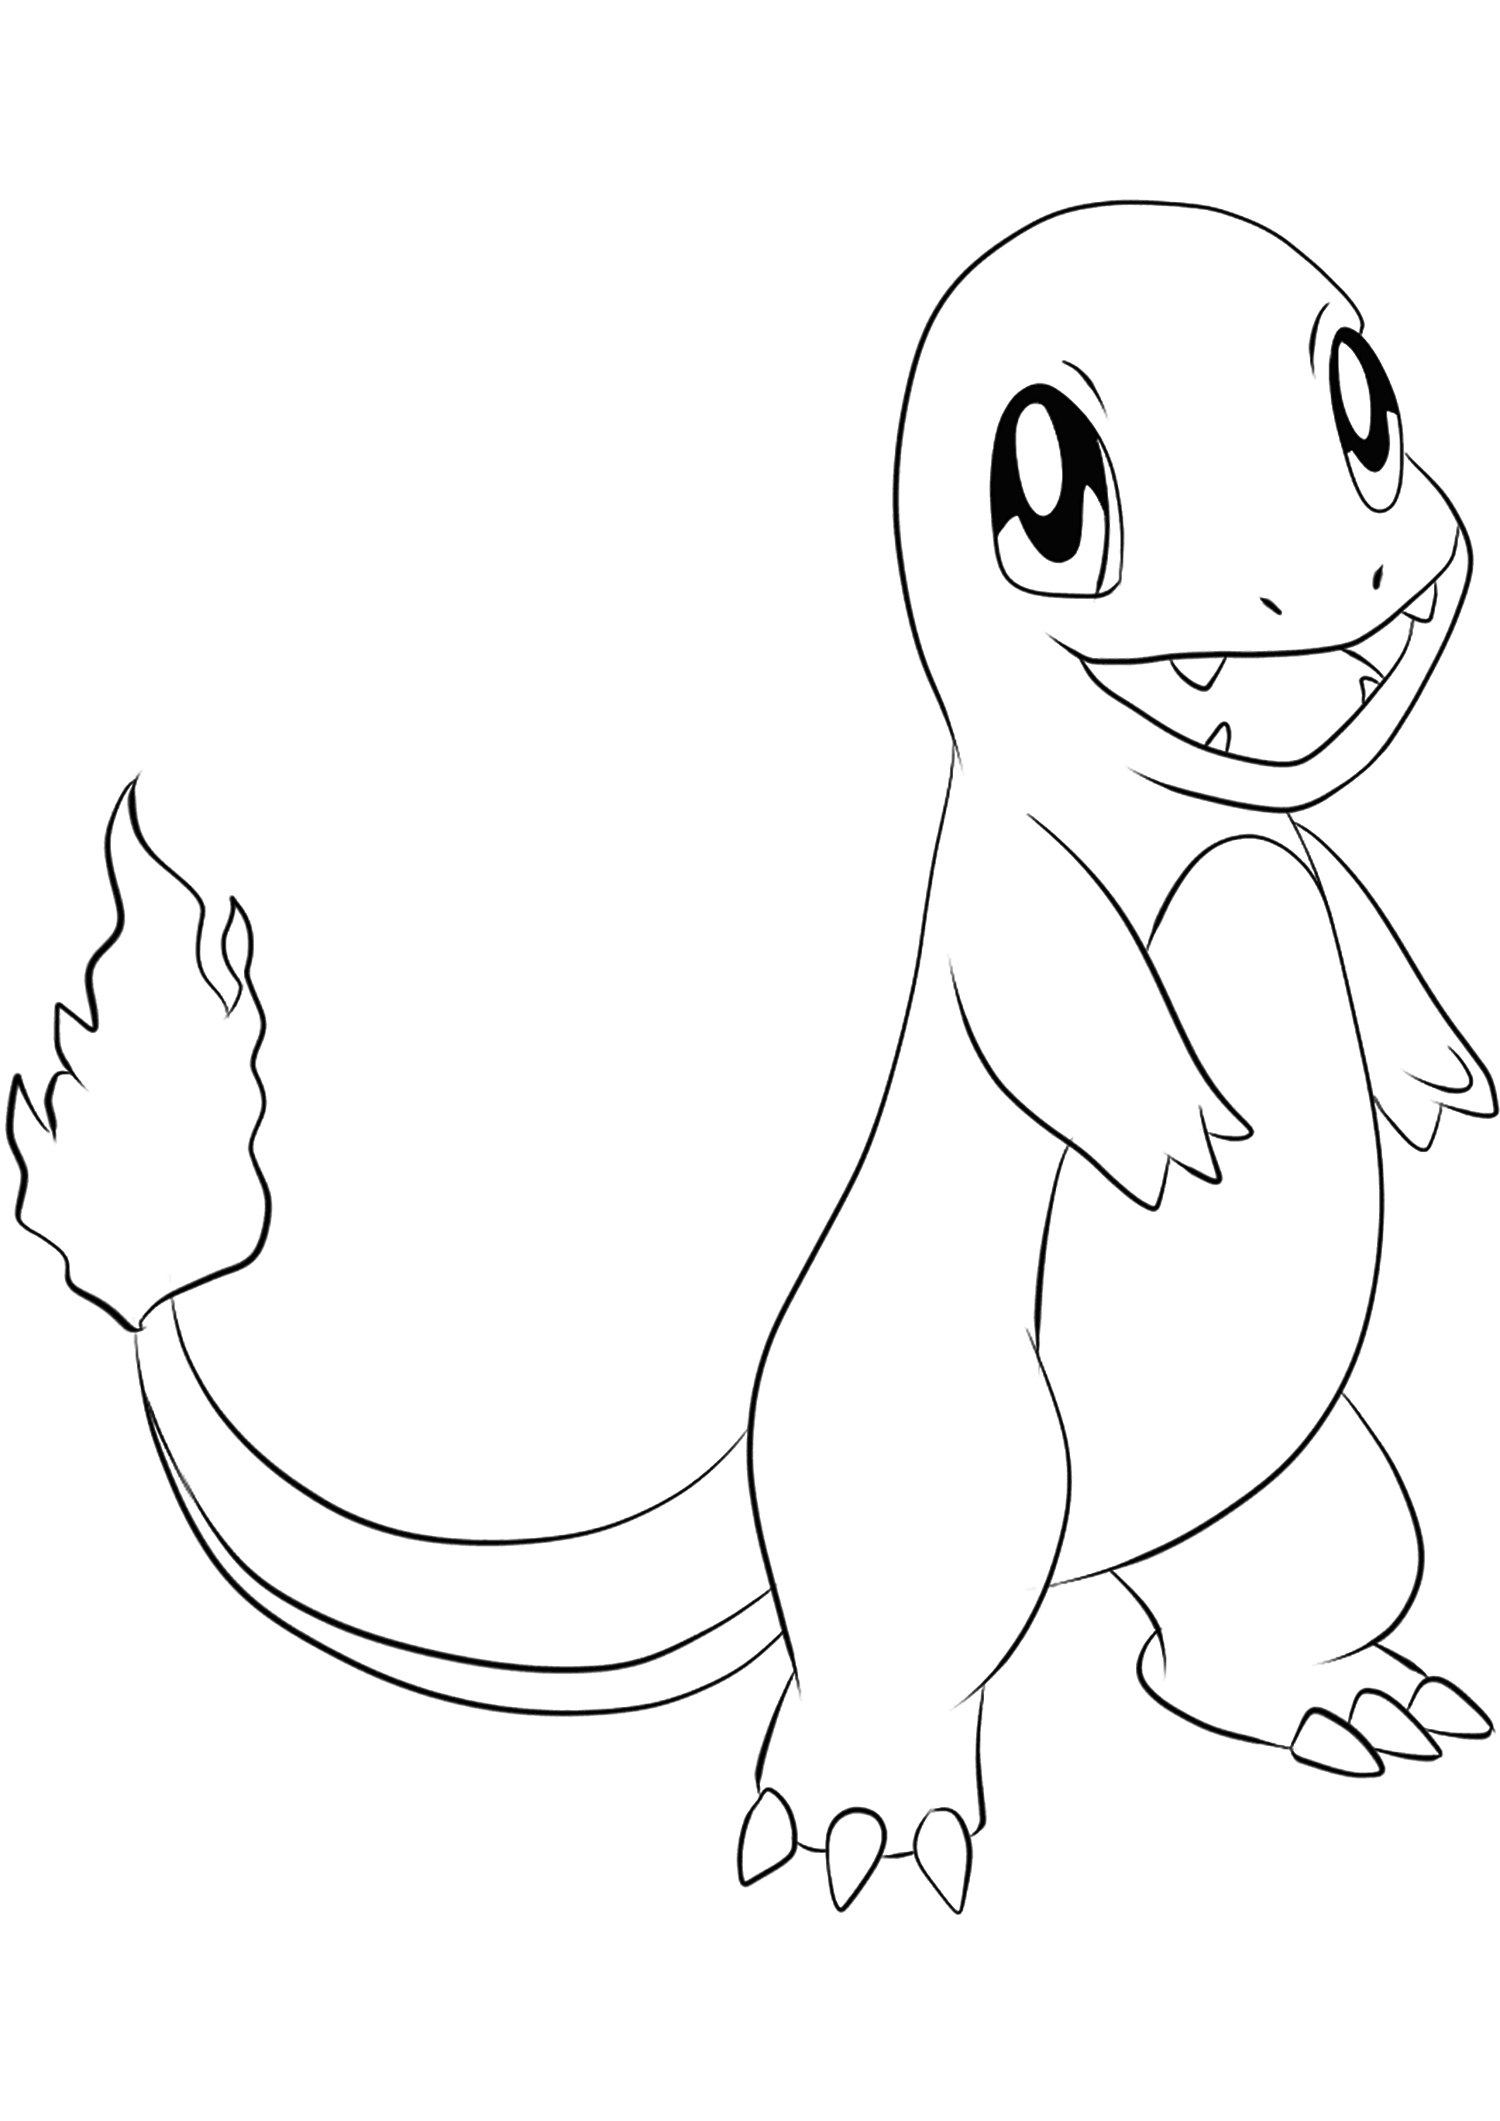 Charmander (No.04). Charmander Coloring page, Generation I Pokemon of type FireOriginal image credit: Pokemon linearts by Lilly Gerbil'font-size:smaller;color:gray'>Permission: All rights reserved © Pokemon company and Ken Sugimori.